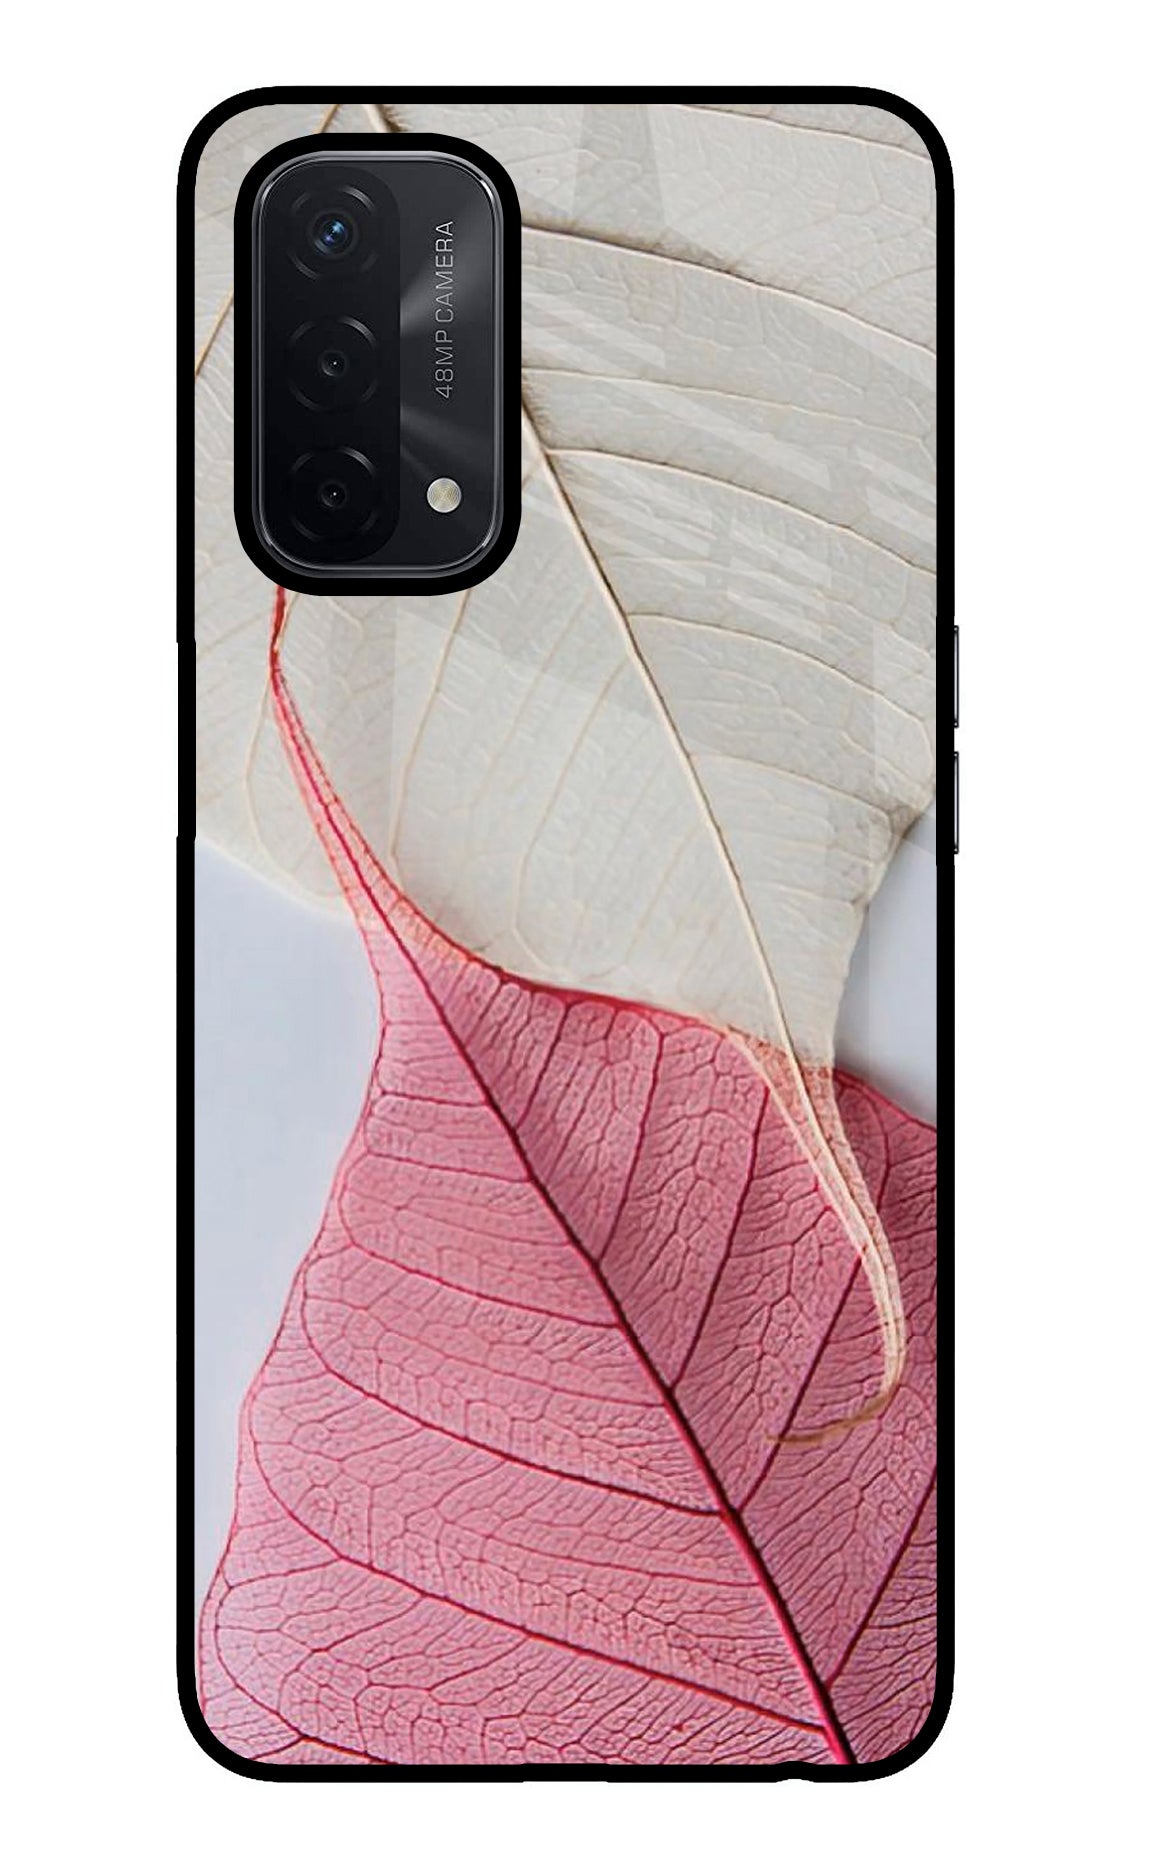 White Pink Leaf Oppo A74 5G Back Cover